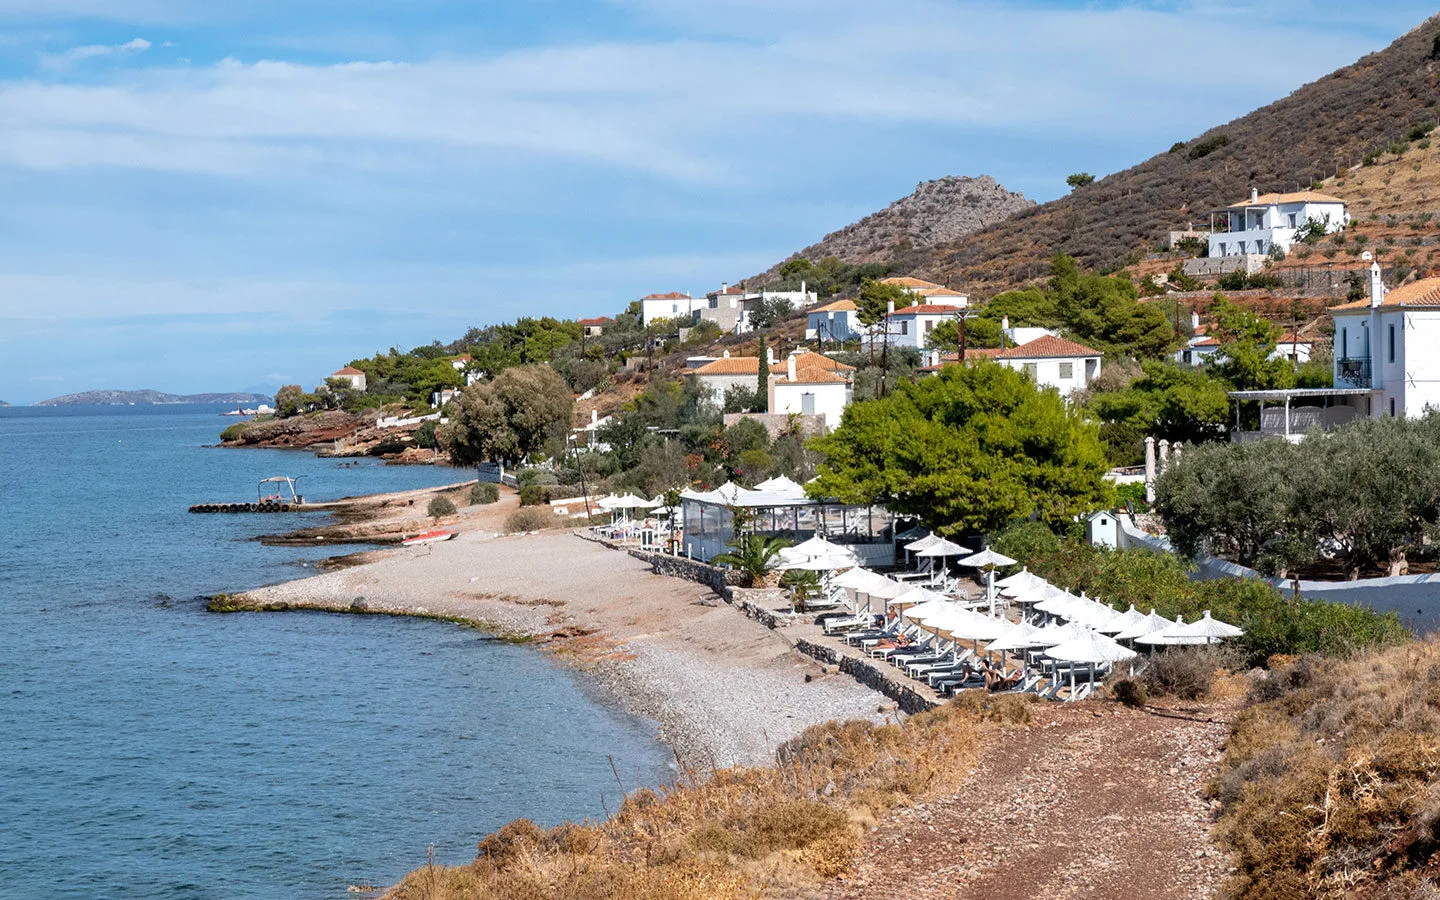 Plakes beach and the Four Seasons Hydra